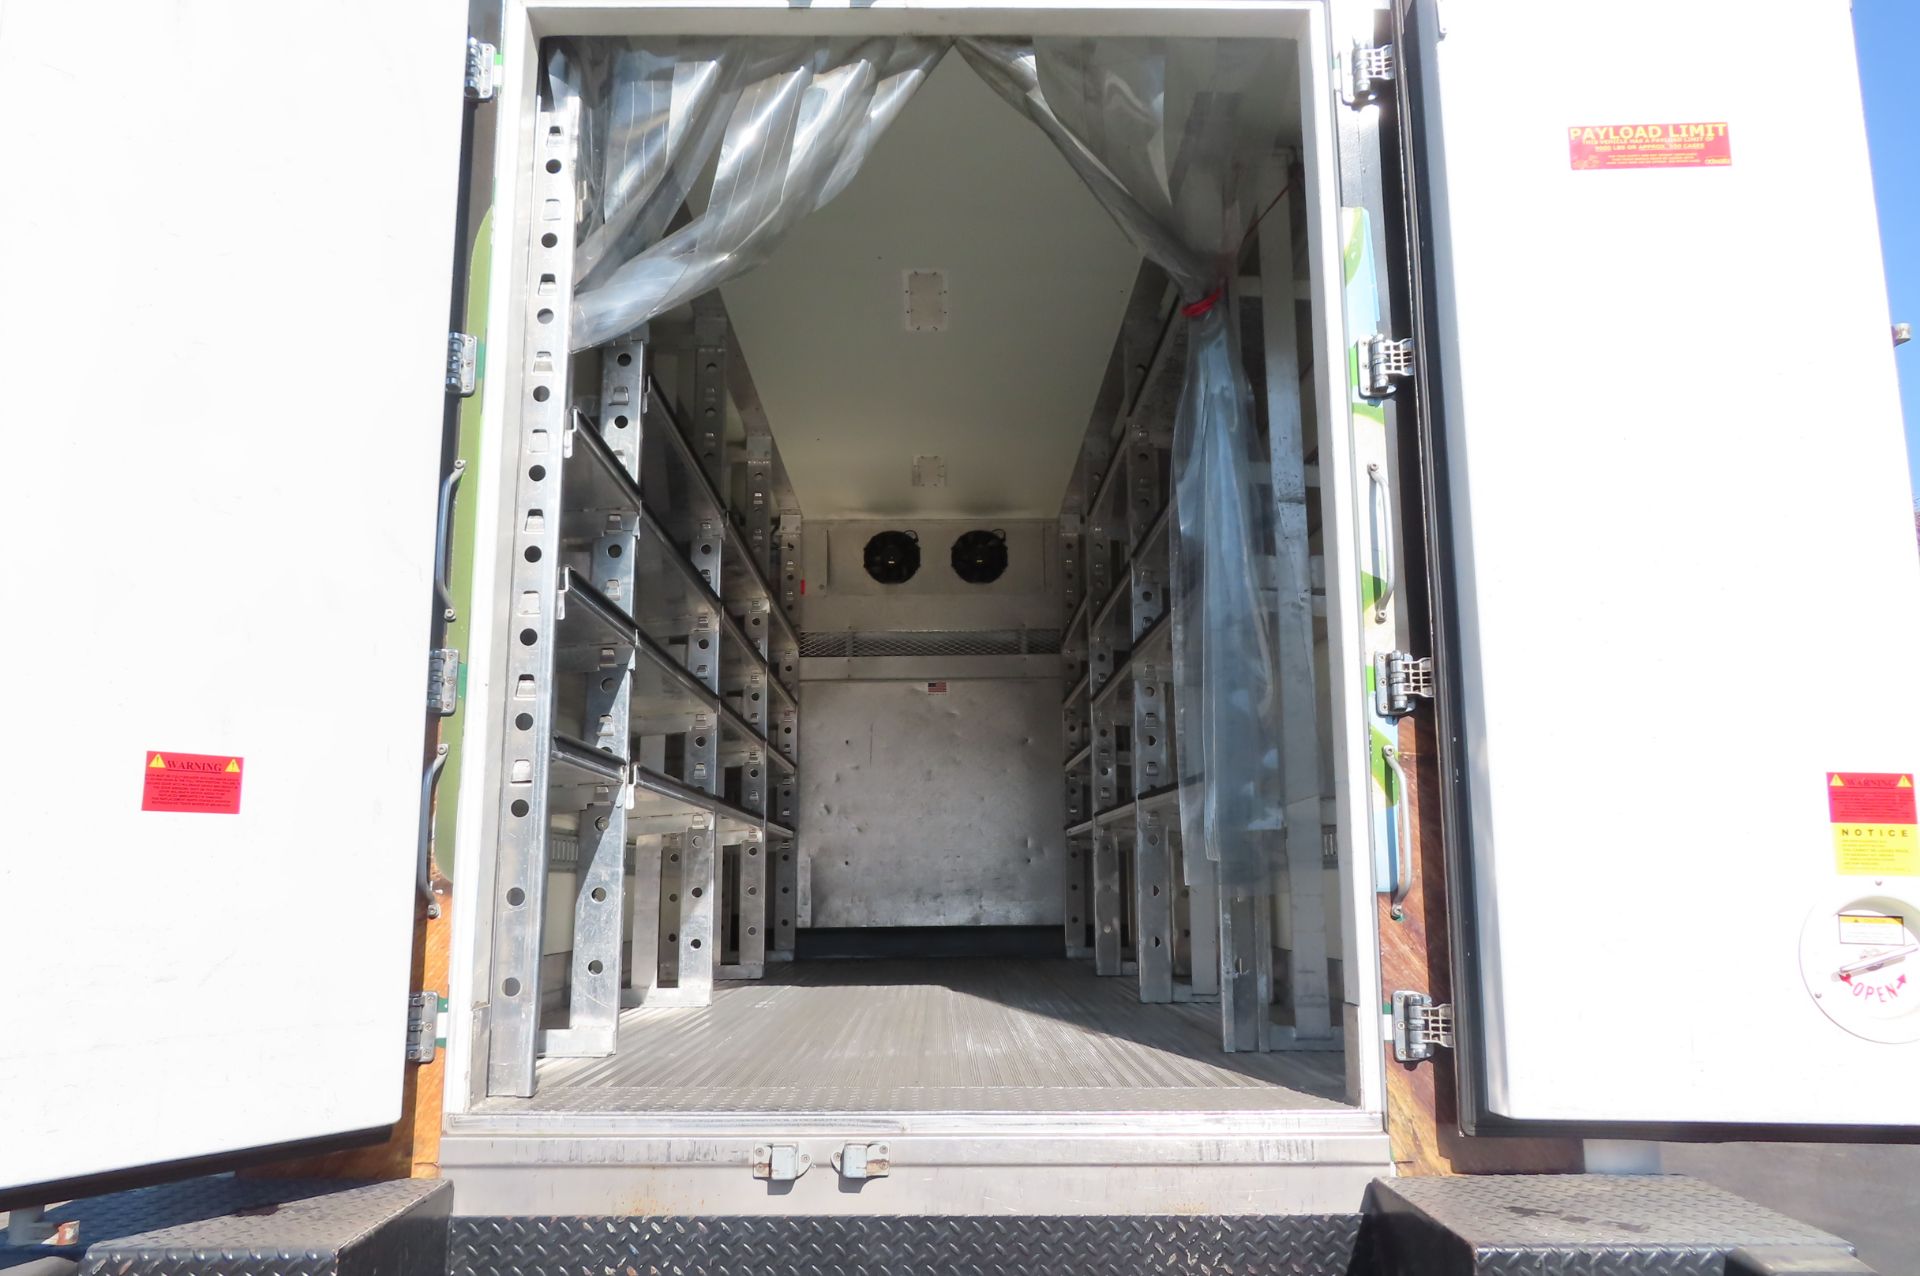 2017 Freightliner refrigerated truck - Image 6 of 11